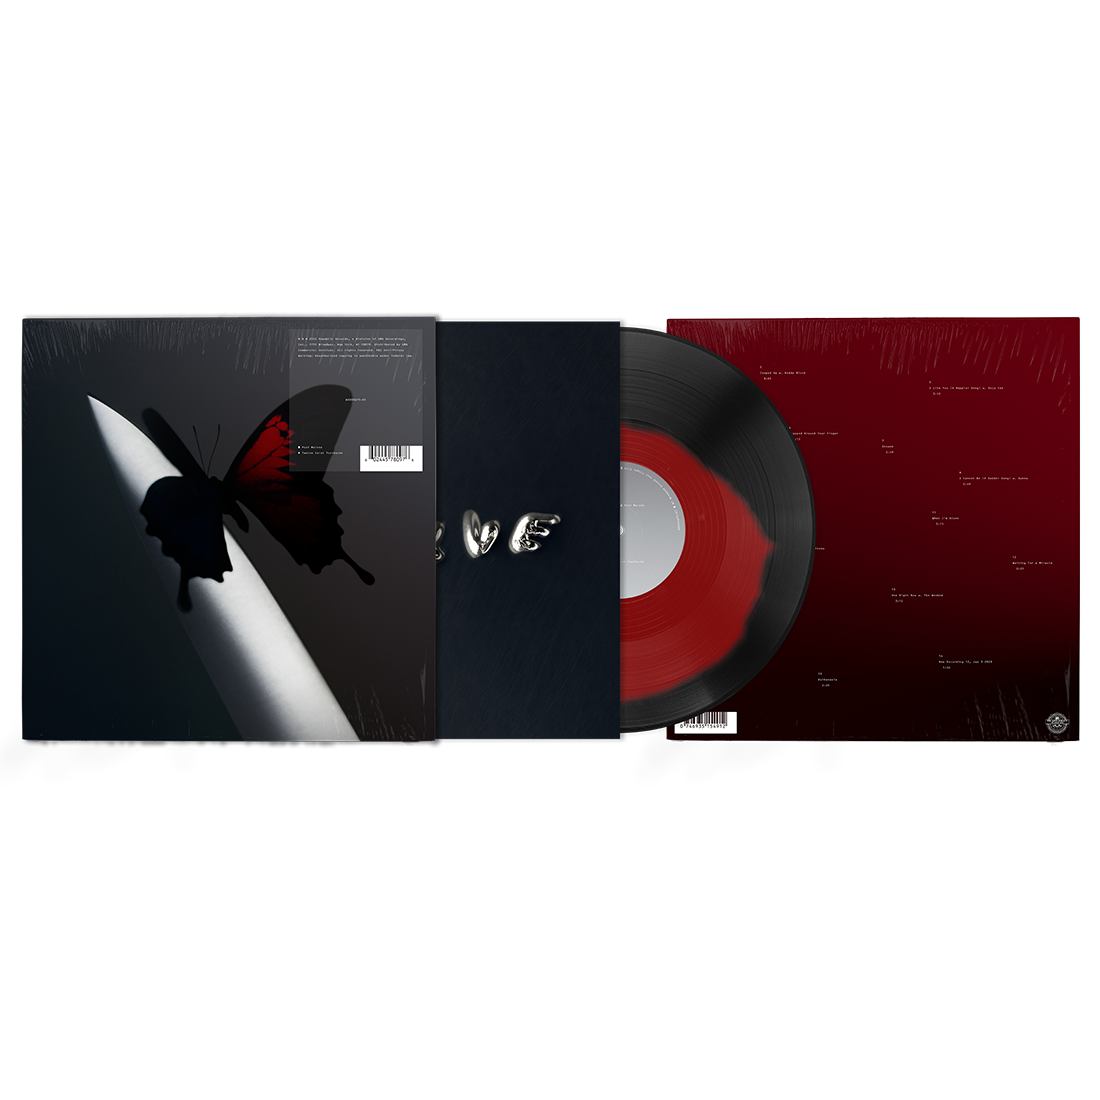 Post Malone - Twelve Carat Toothache: Limited Edition Black + Red Spot 2LP